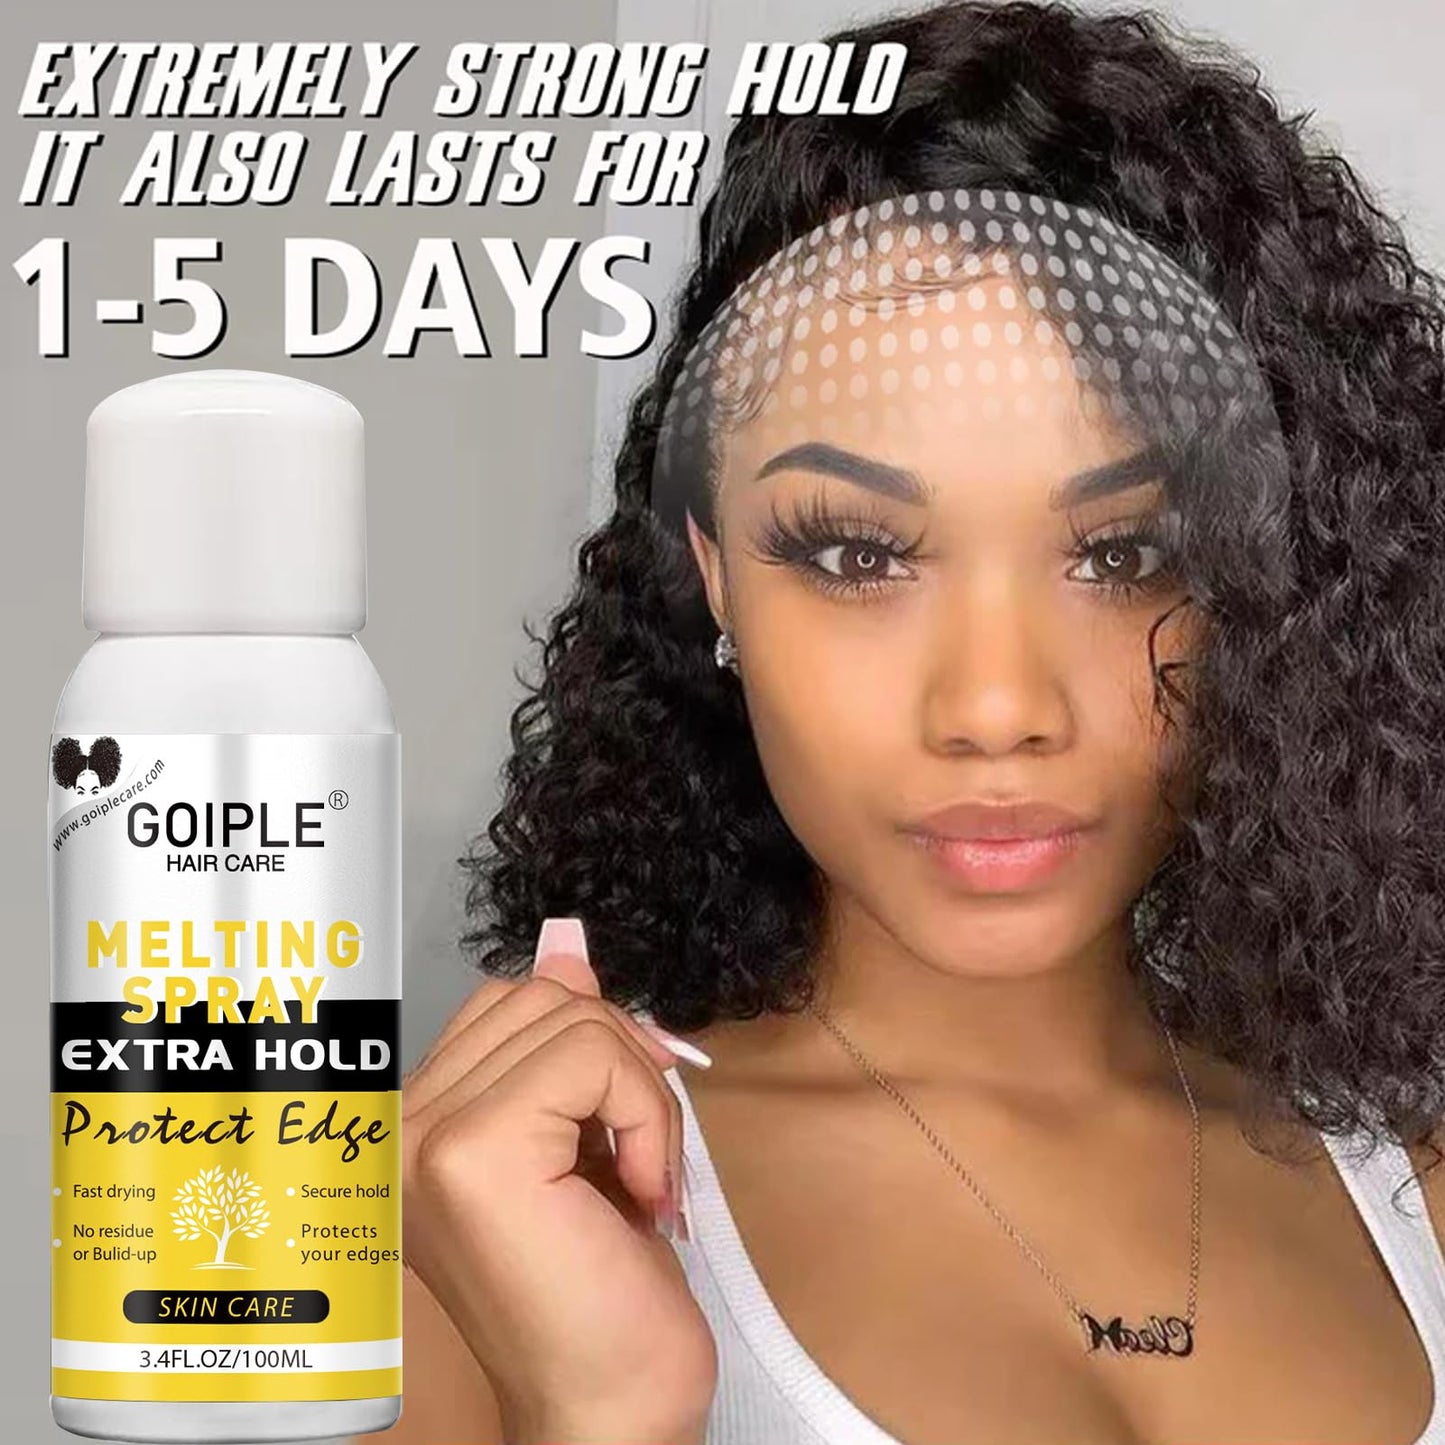 Lace Tint Spray for Lace Wig Lace Melting and Holding Spray Hair Adhesive for Wigs, Closures Wigs And Closure Front Extensions, Strong Natural Finishing Hold with Control, Hair Wax Stick Edge Control